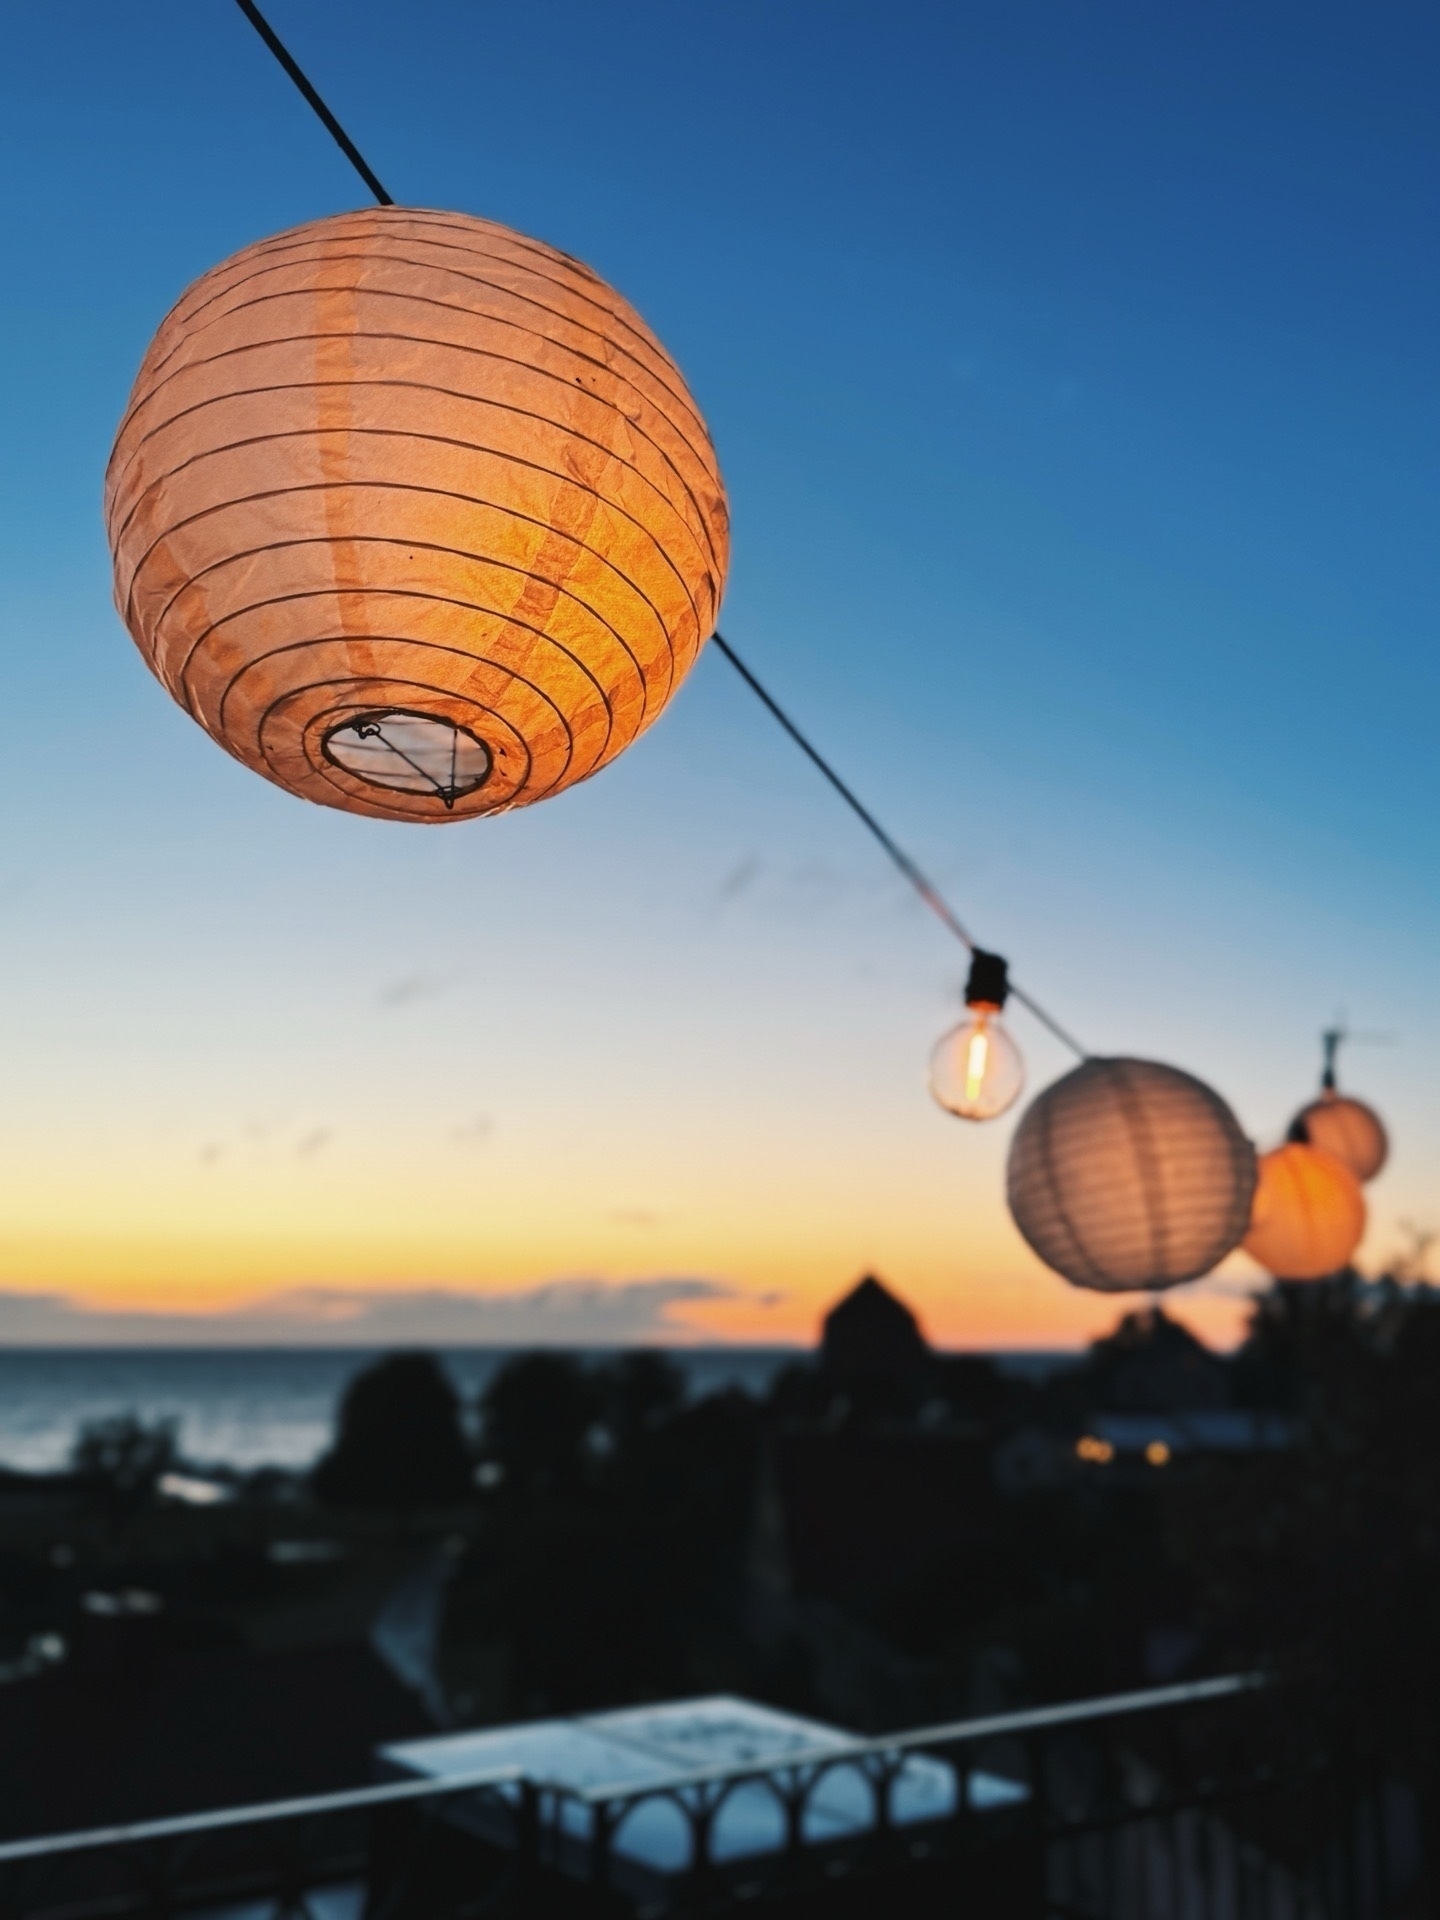 A close-up of lit paper lanterns hanging on a string, set against a twilight sky with a silhouetted landscape and the Baltic Sea in the distance.